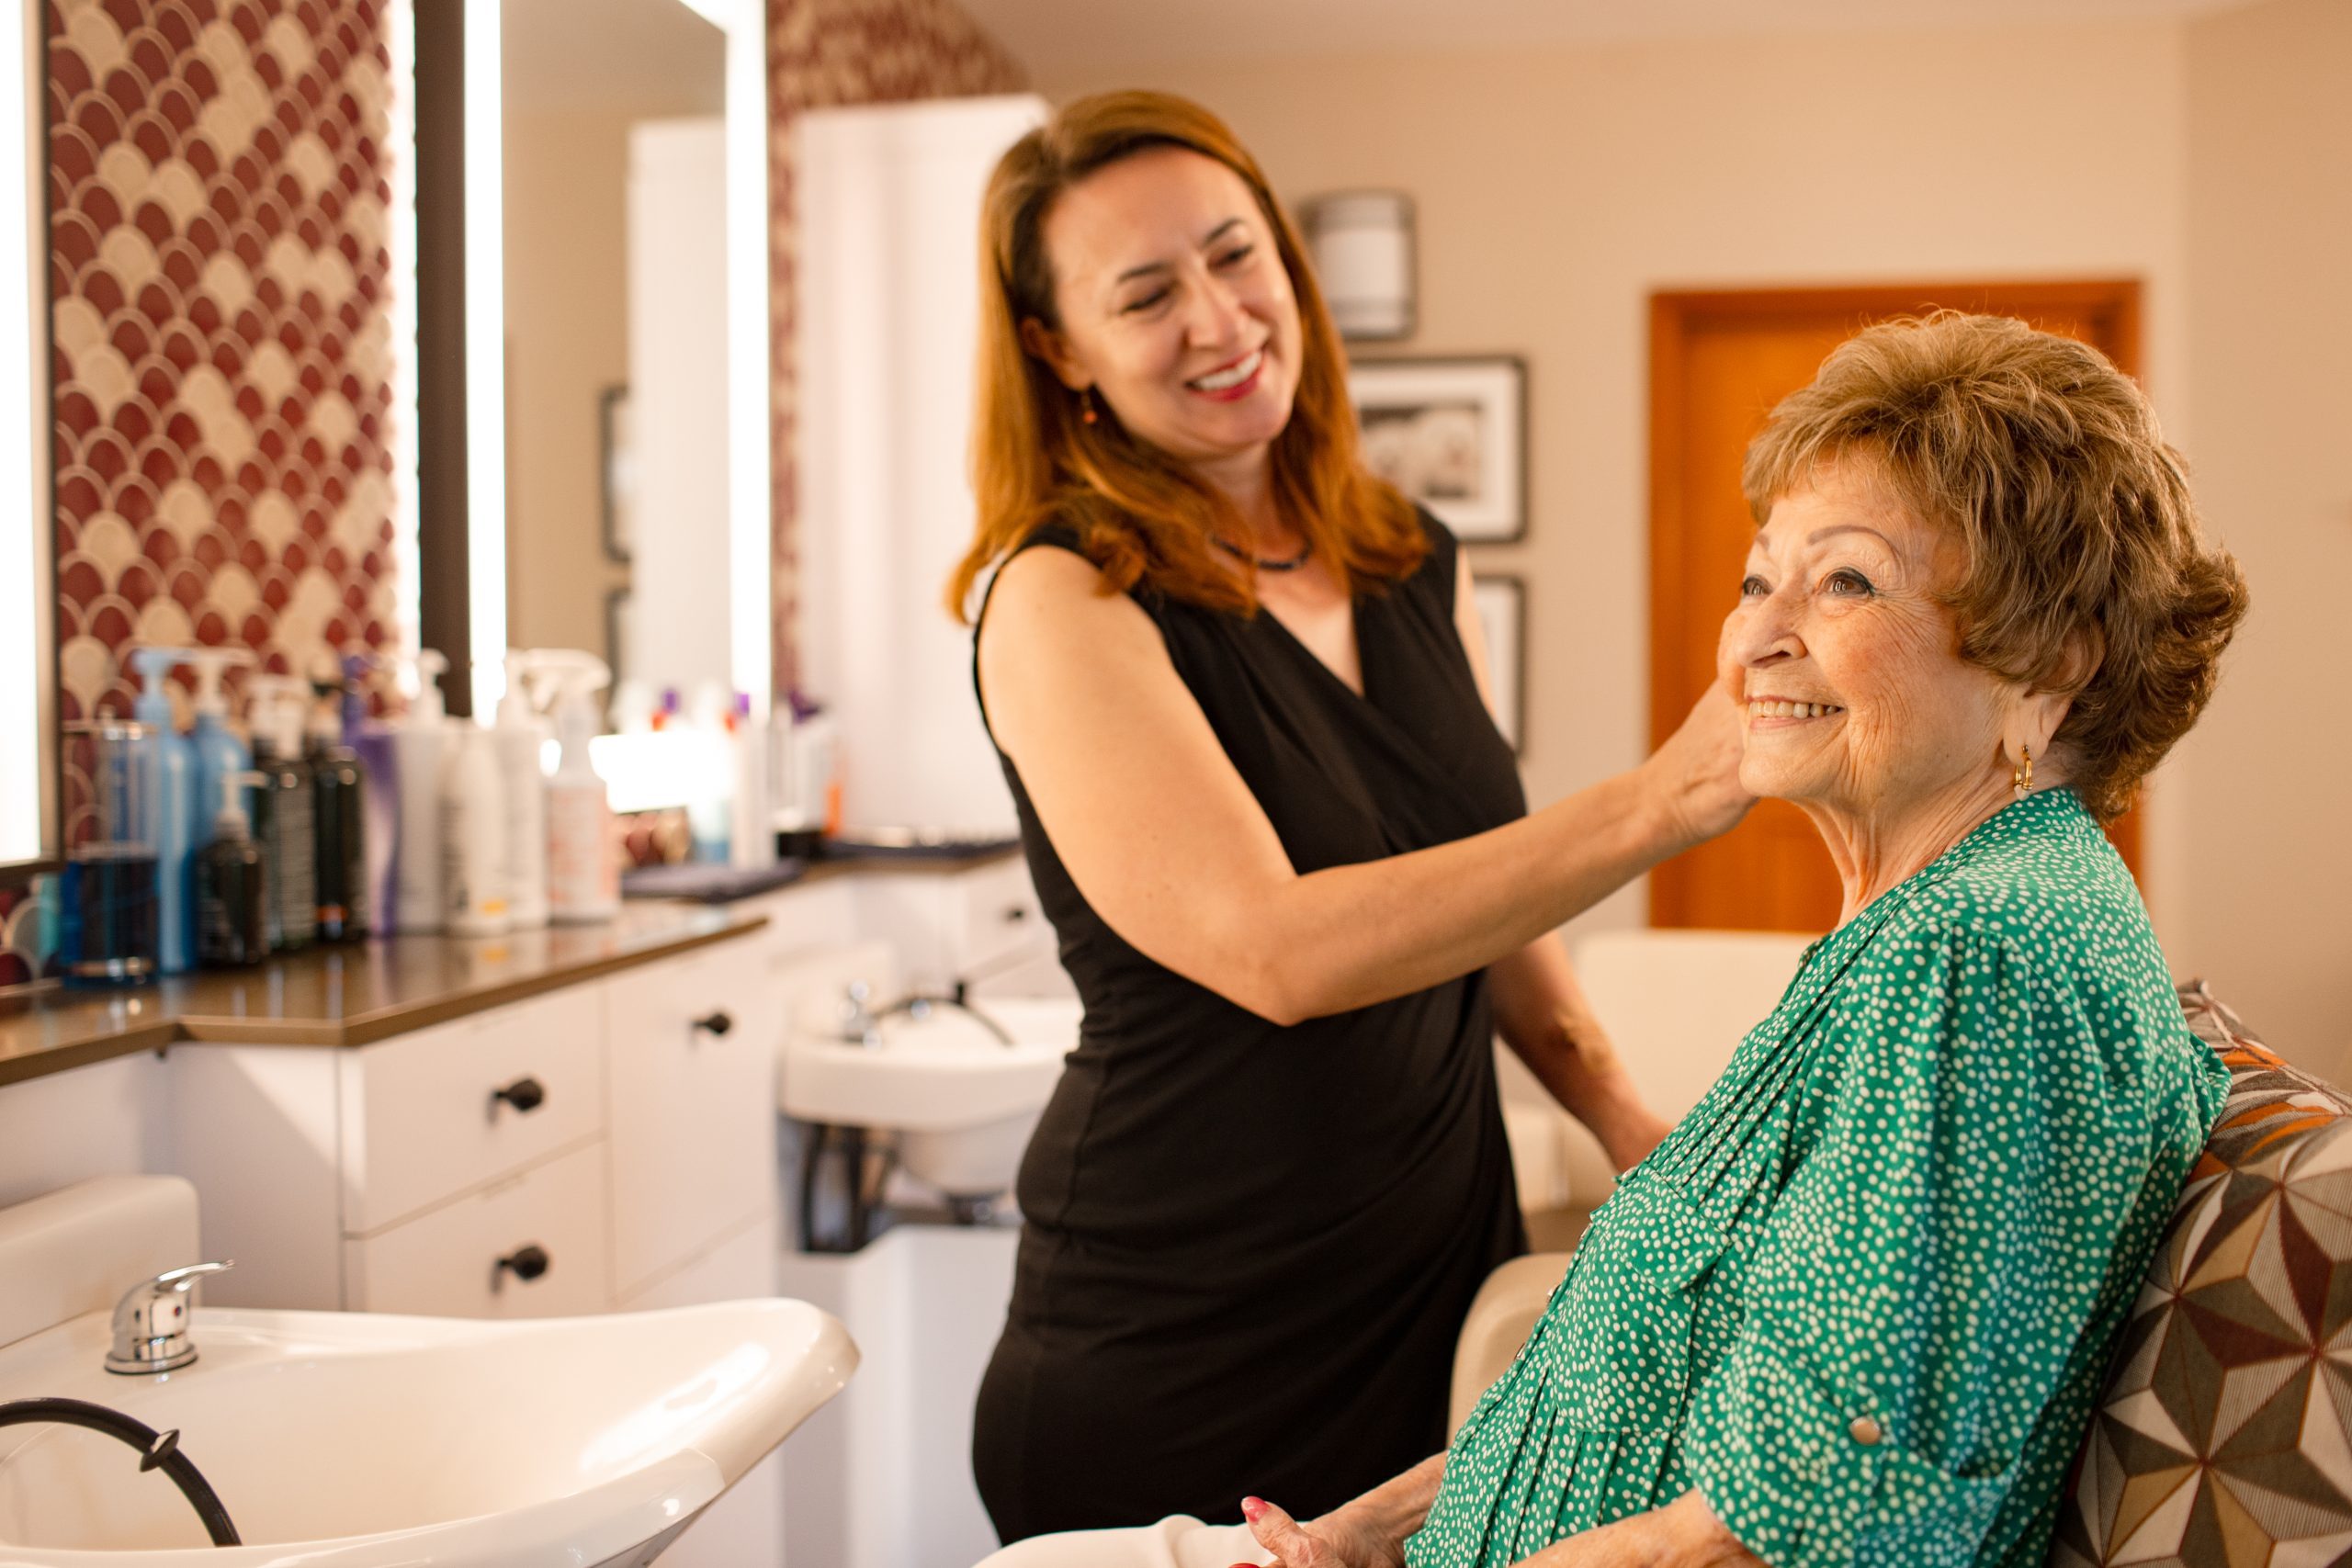 smiling elderly woman getting her hair done at a salon wearing a green shirt